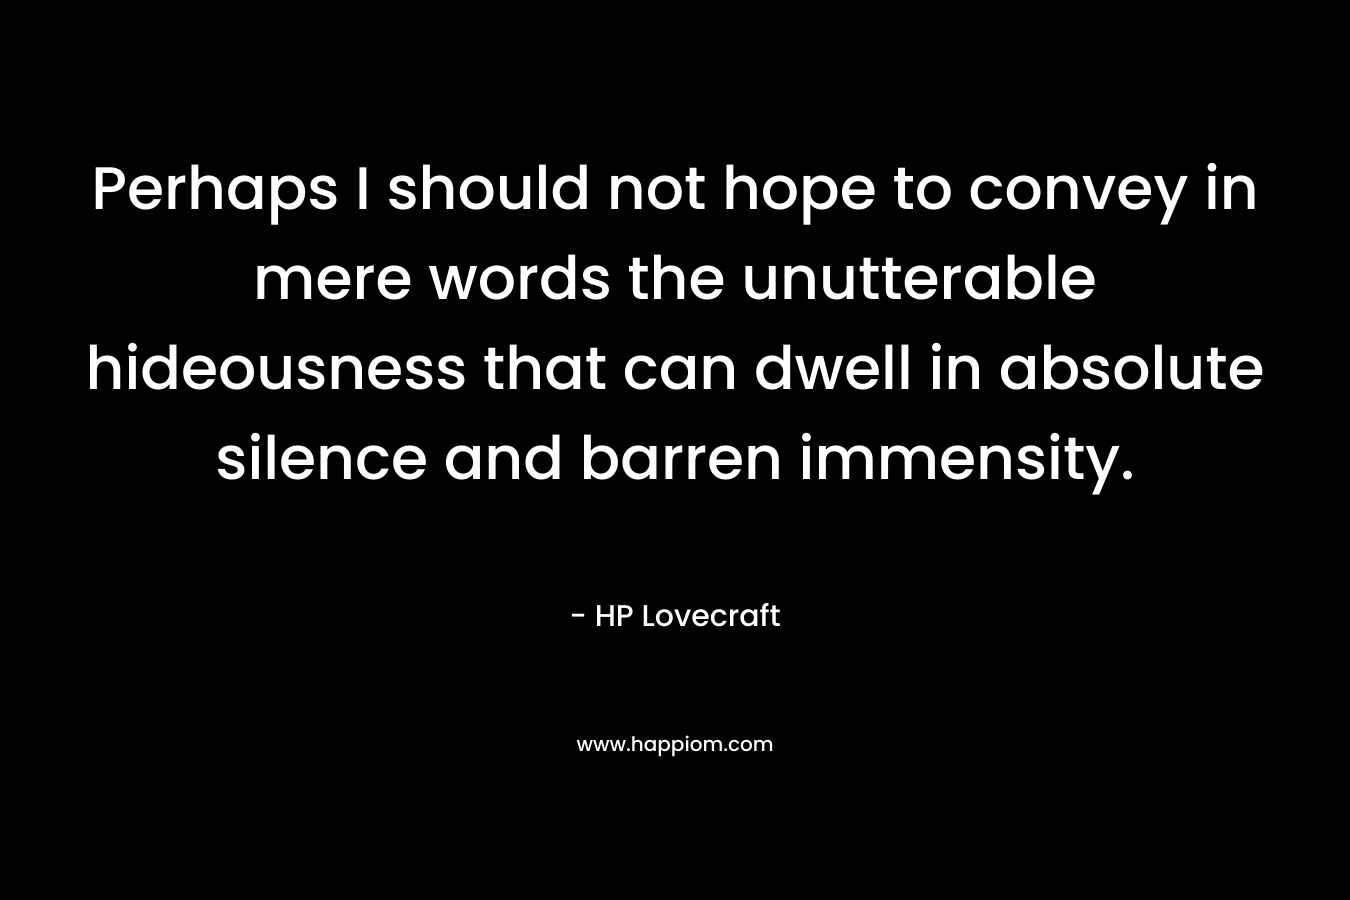 Perhaps I should not hope to convey in mere words the unutterable hideousness that can dwell in absolute silence and barren immensity. – HP Lovecraft